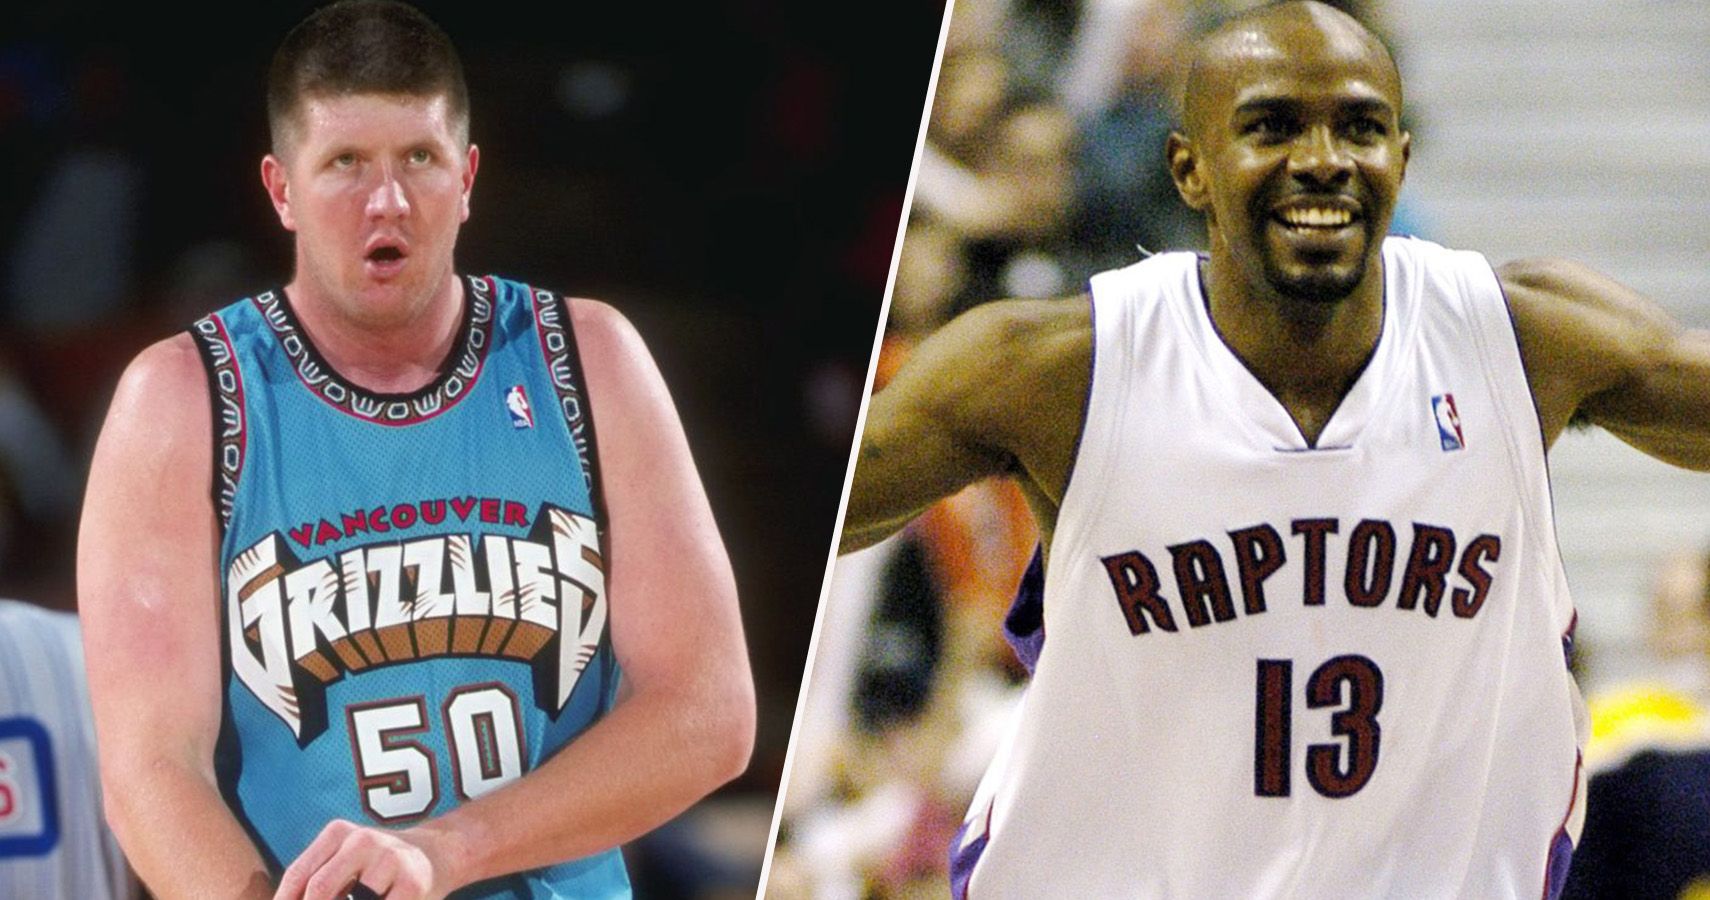 10 Nba Players From The 90s And 10 From The 00s Who Were Merely One Season Wonders